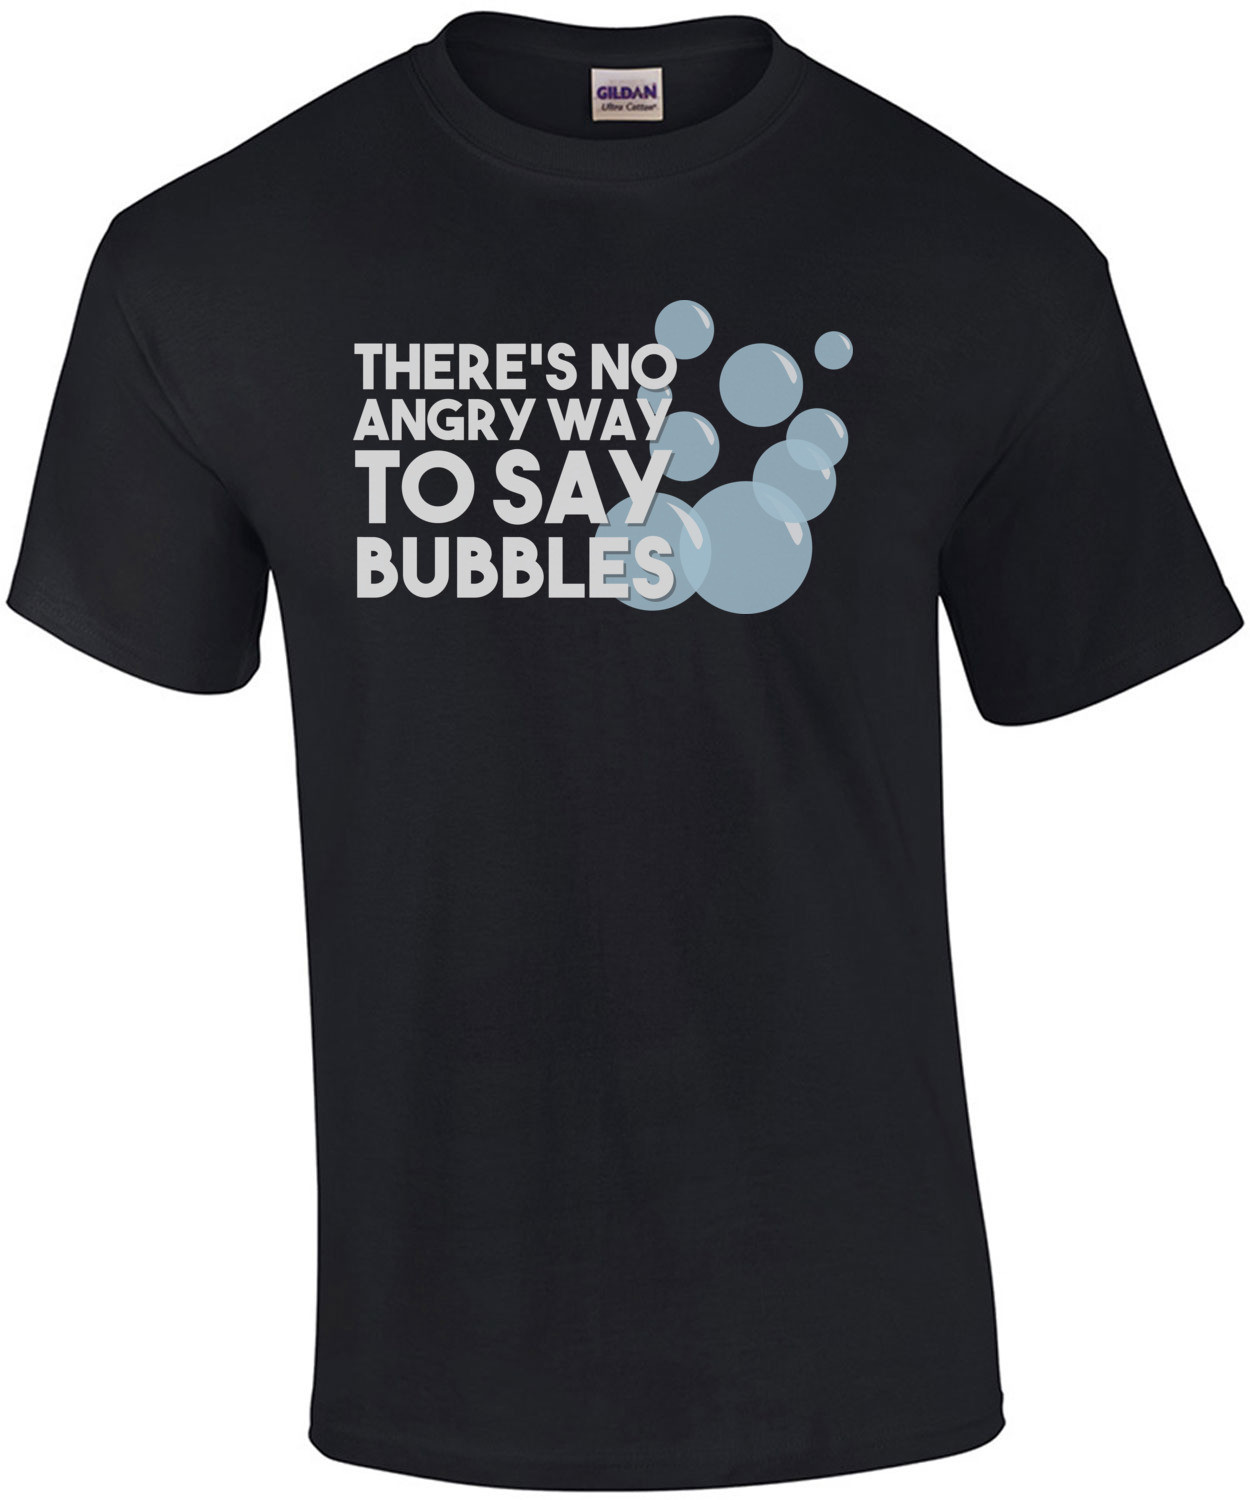 There's no angry way to say bubbles T-Shirt